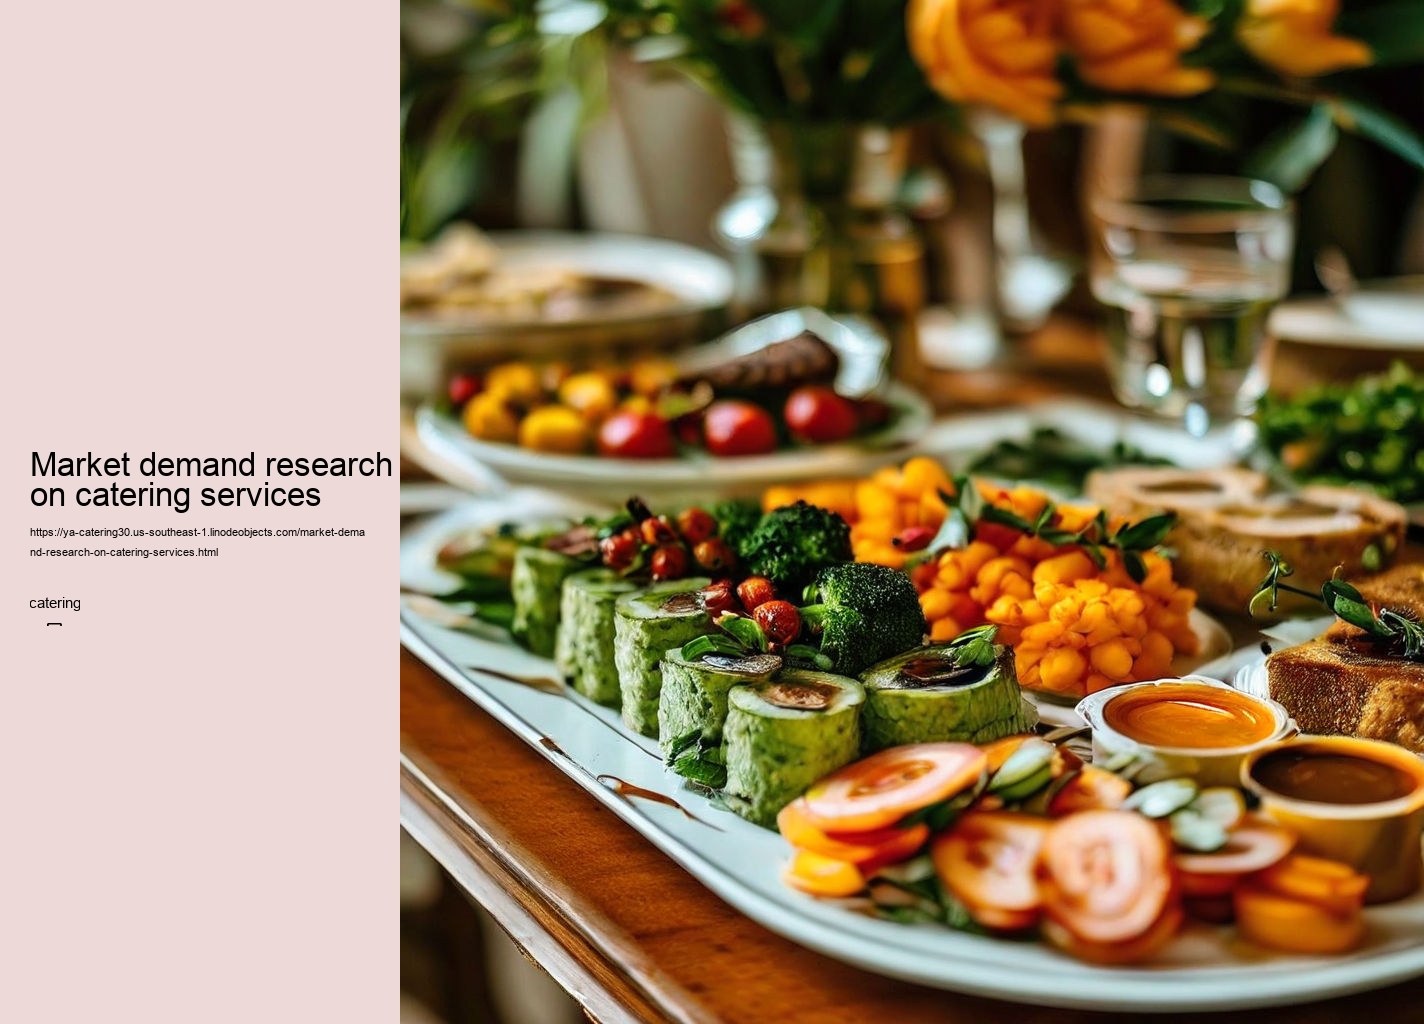 Market demand research on catering services